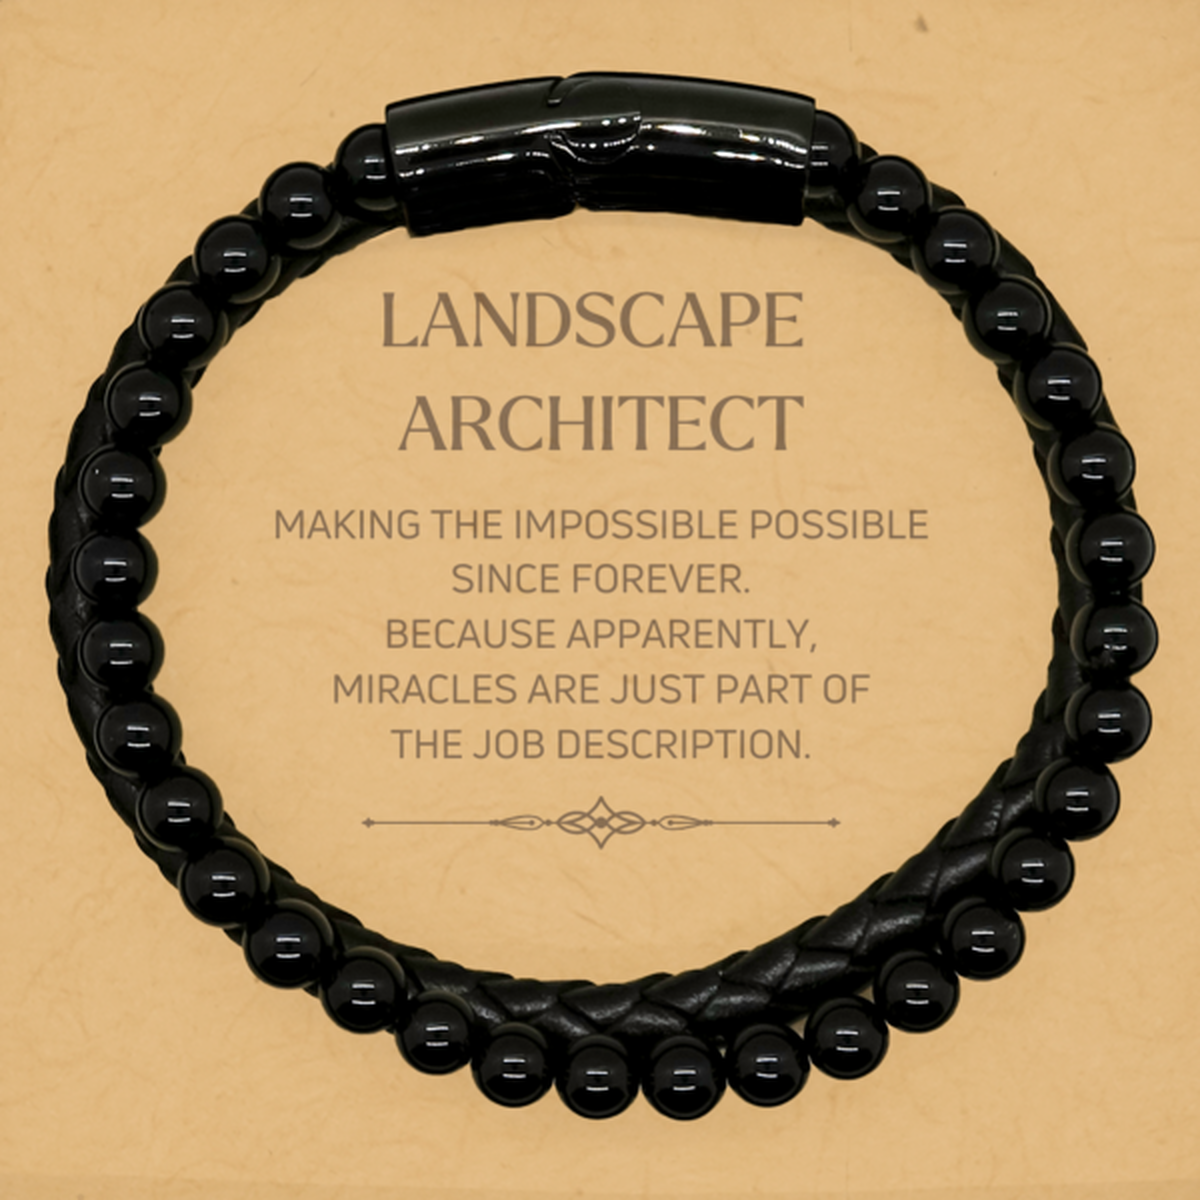 Funny Landscape Architect Gifts, Miracles are just part of the job description, Inspirational Birthday Stone Leather Bracelets For Landscape Architect, Men, Women, Coworkers, Friends, Boss